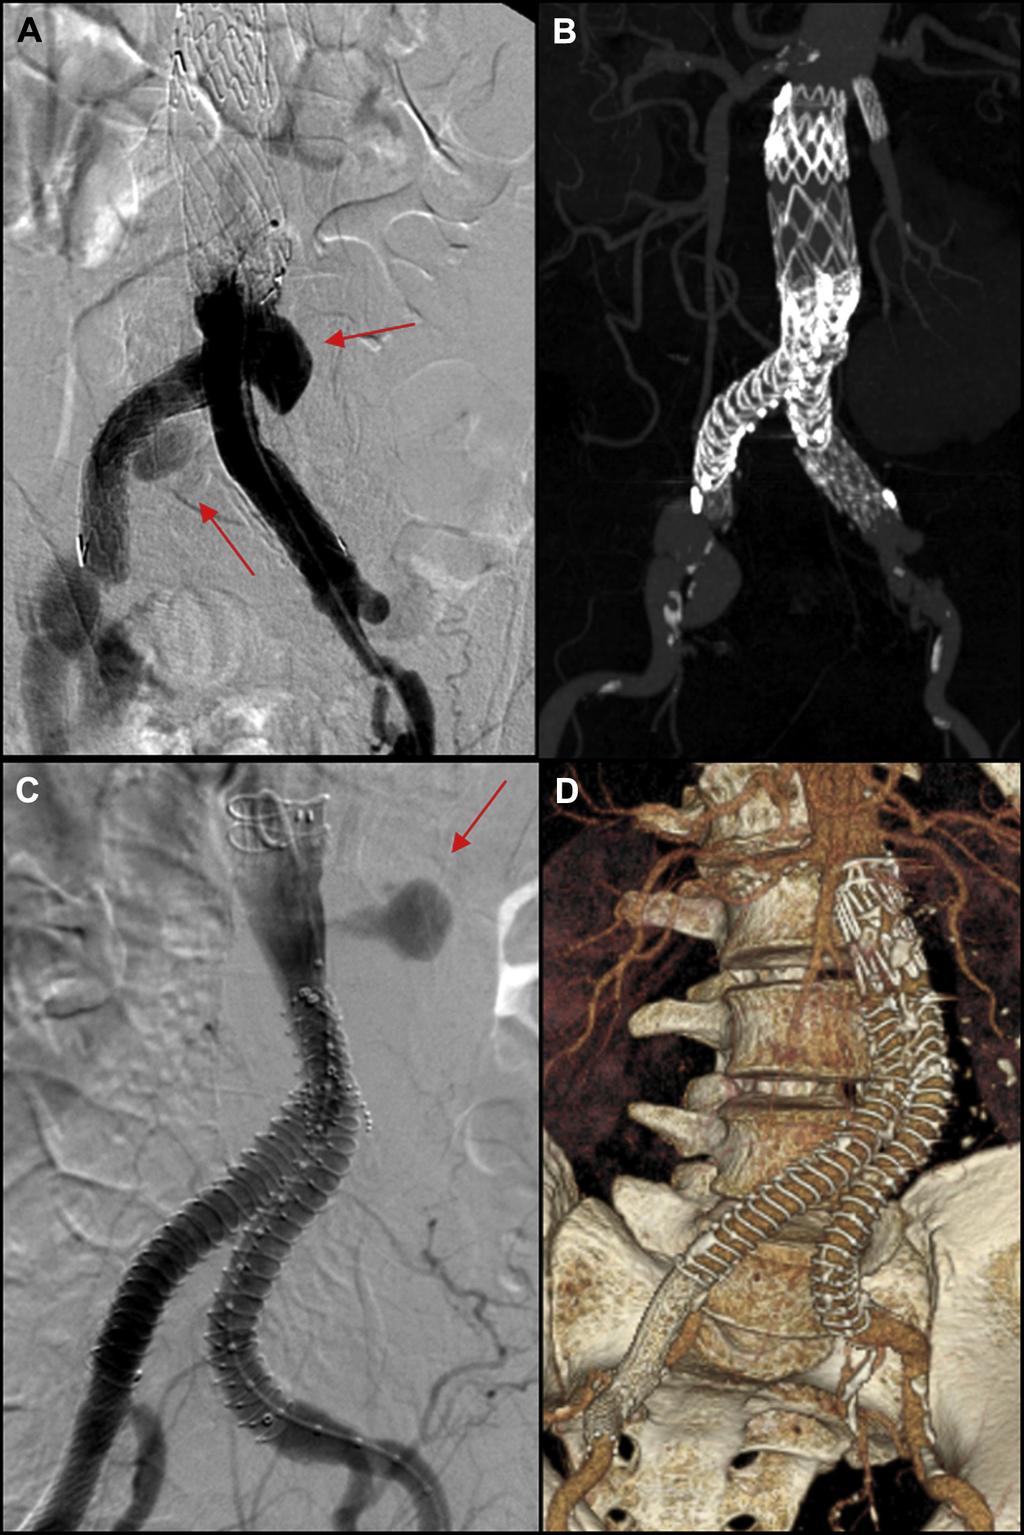 250 Pini et al December 2015 Fig 1. Patient 1 (A and B) and patient 3 (C and D). A, Preoperative digital subtraction angiography (DSA) of a type IIIb endoleak from both iliac limbs (arrows).